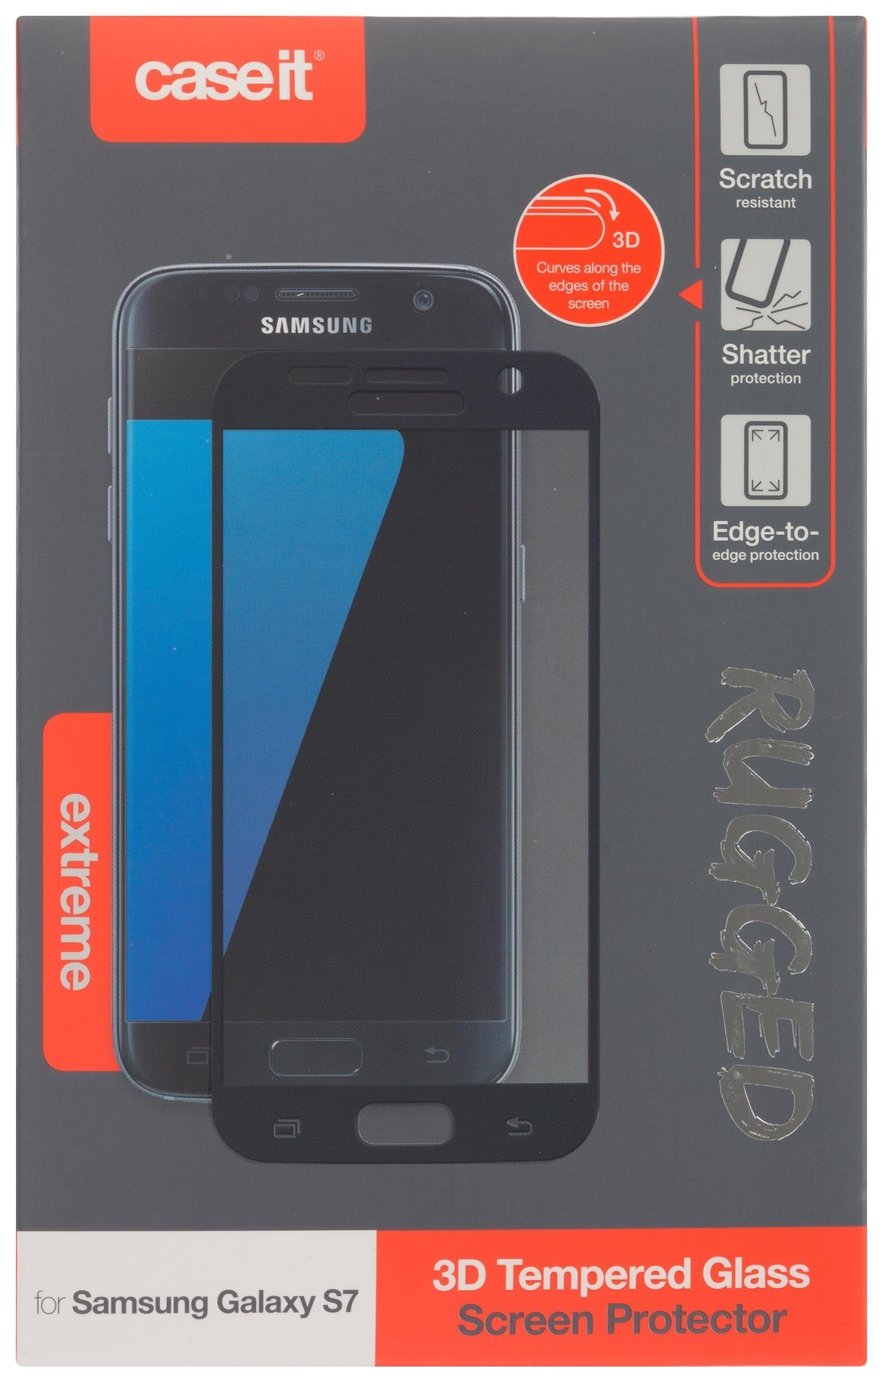 Case It Samsung Galaxy S7 Glass Screen Protector review